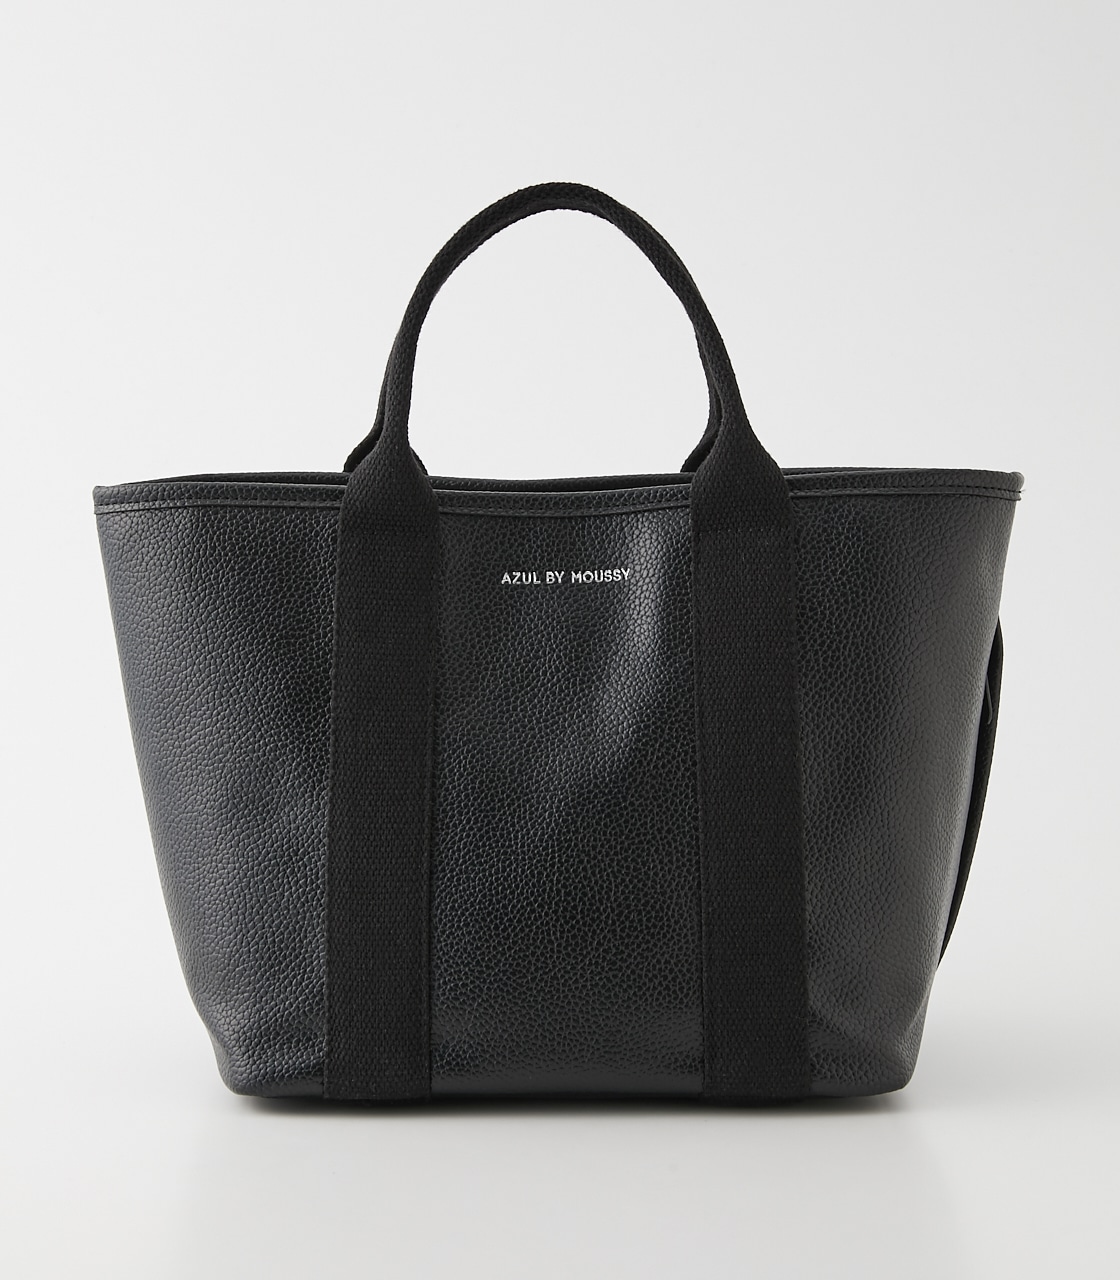 FAUX LEATHER MINI TOTE BAG/フェイクレザーミニトートバッグ 詳細画像 BLK 1